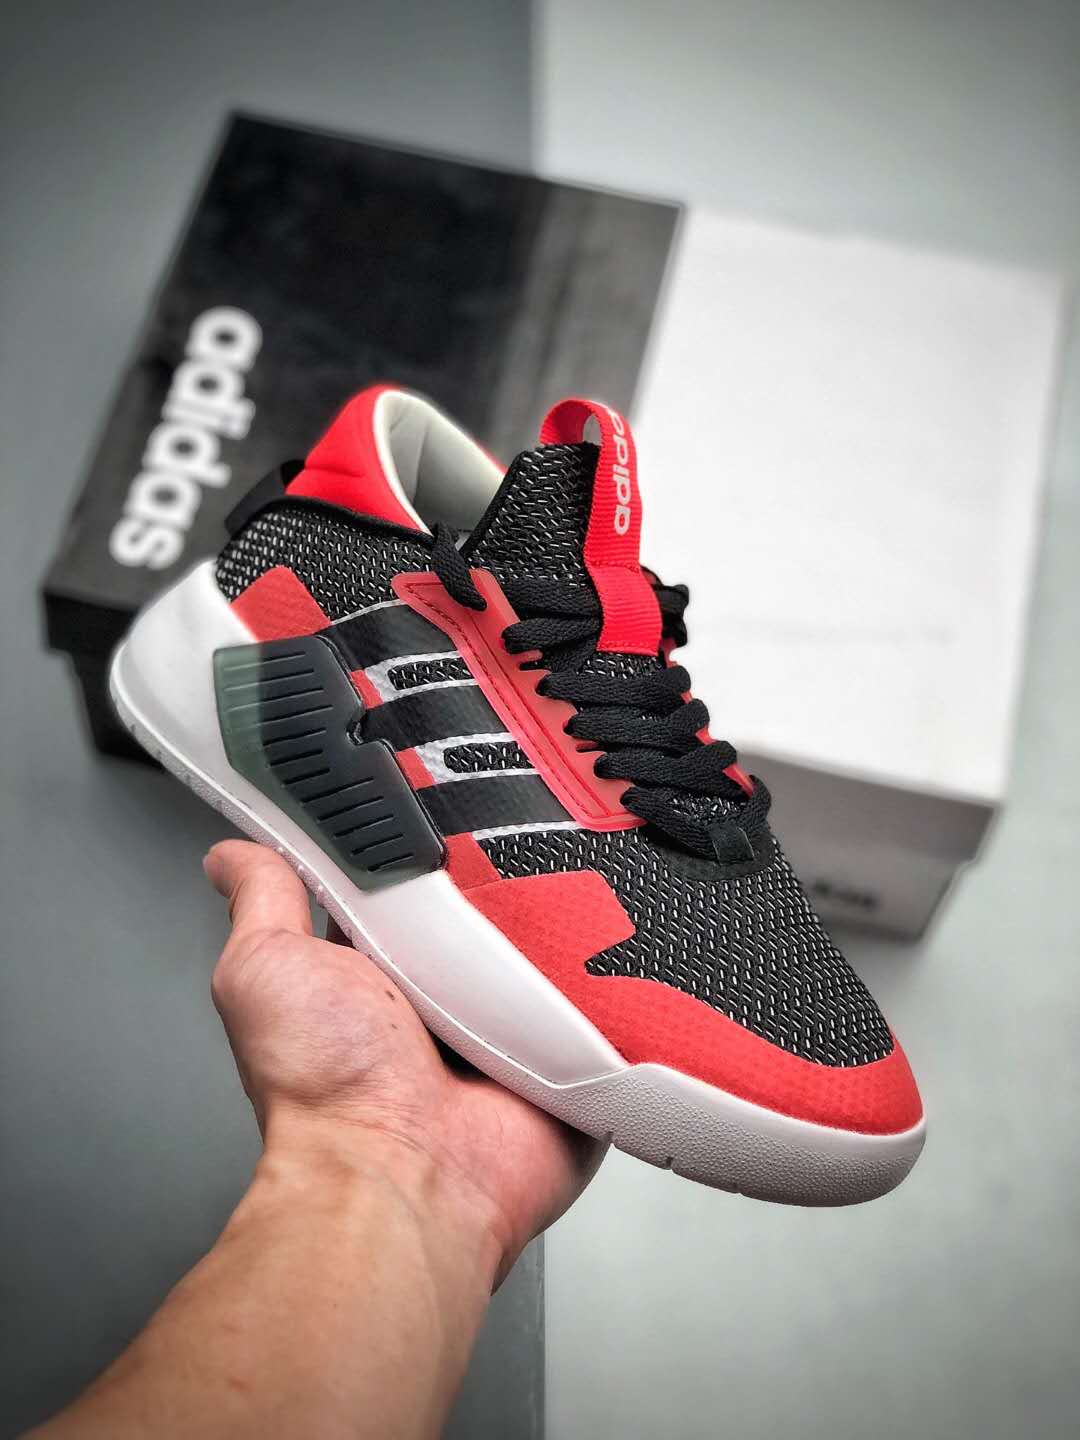 Adidas Neo Bball90s Black Red White EF0604 - Stylish and Versatile Footwear